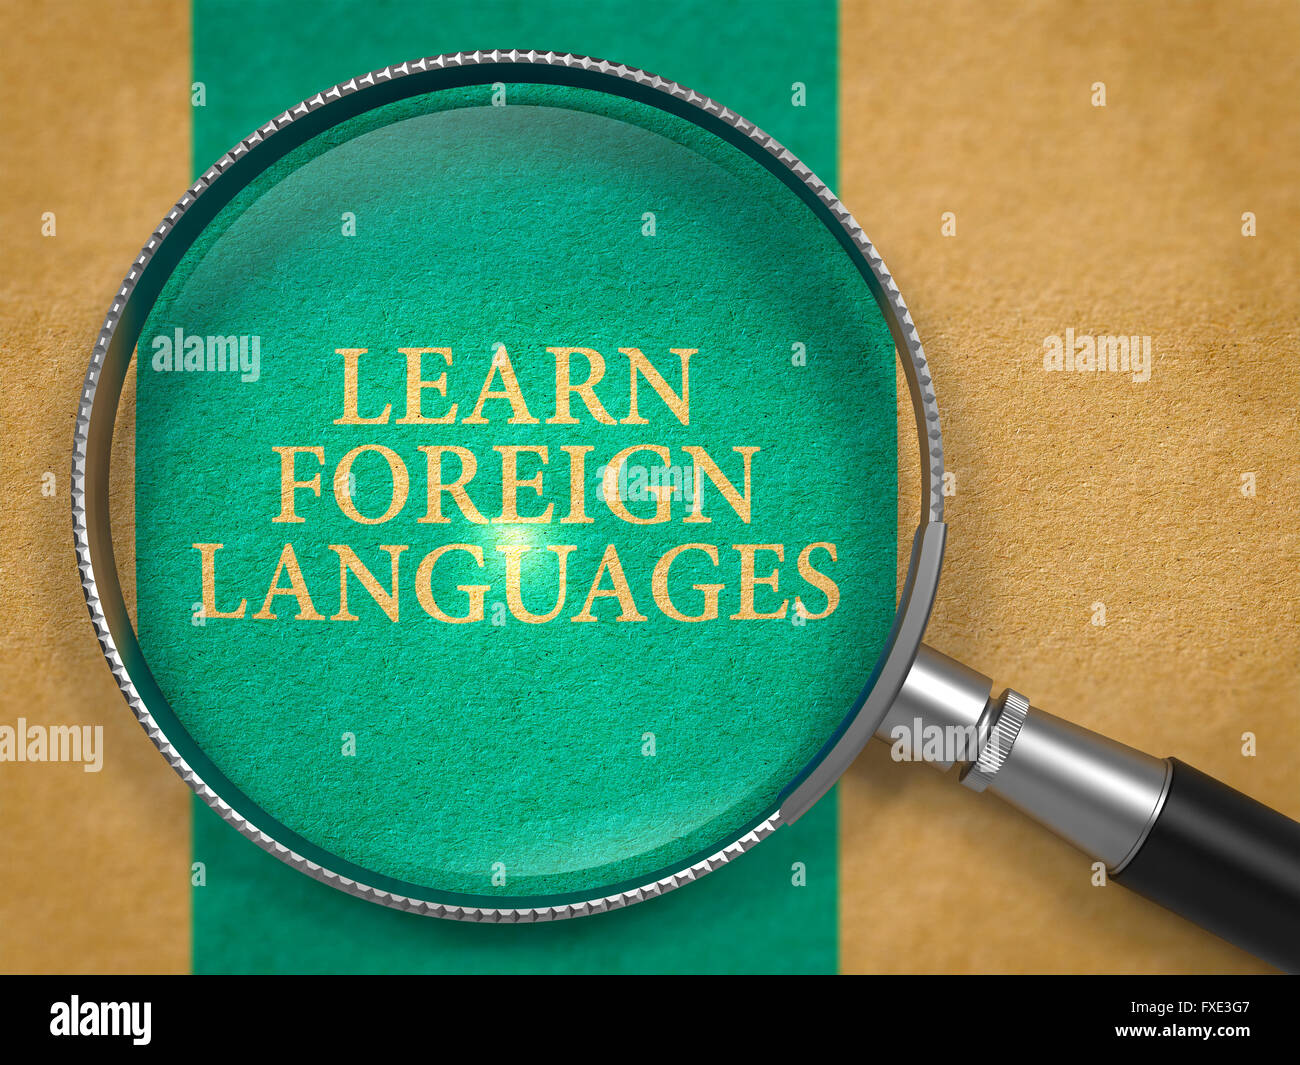 Learn Foreign Languages through Lens on Old Paper. Stock Photo